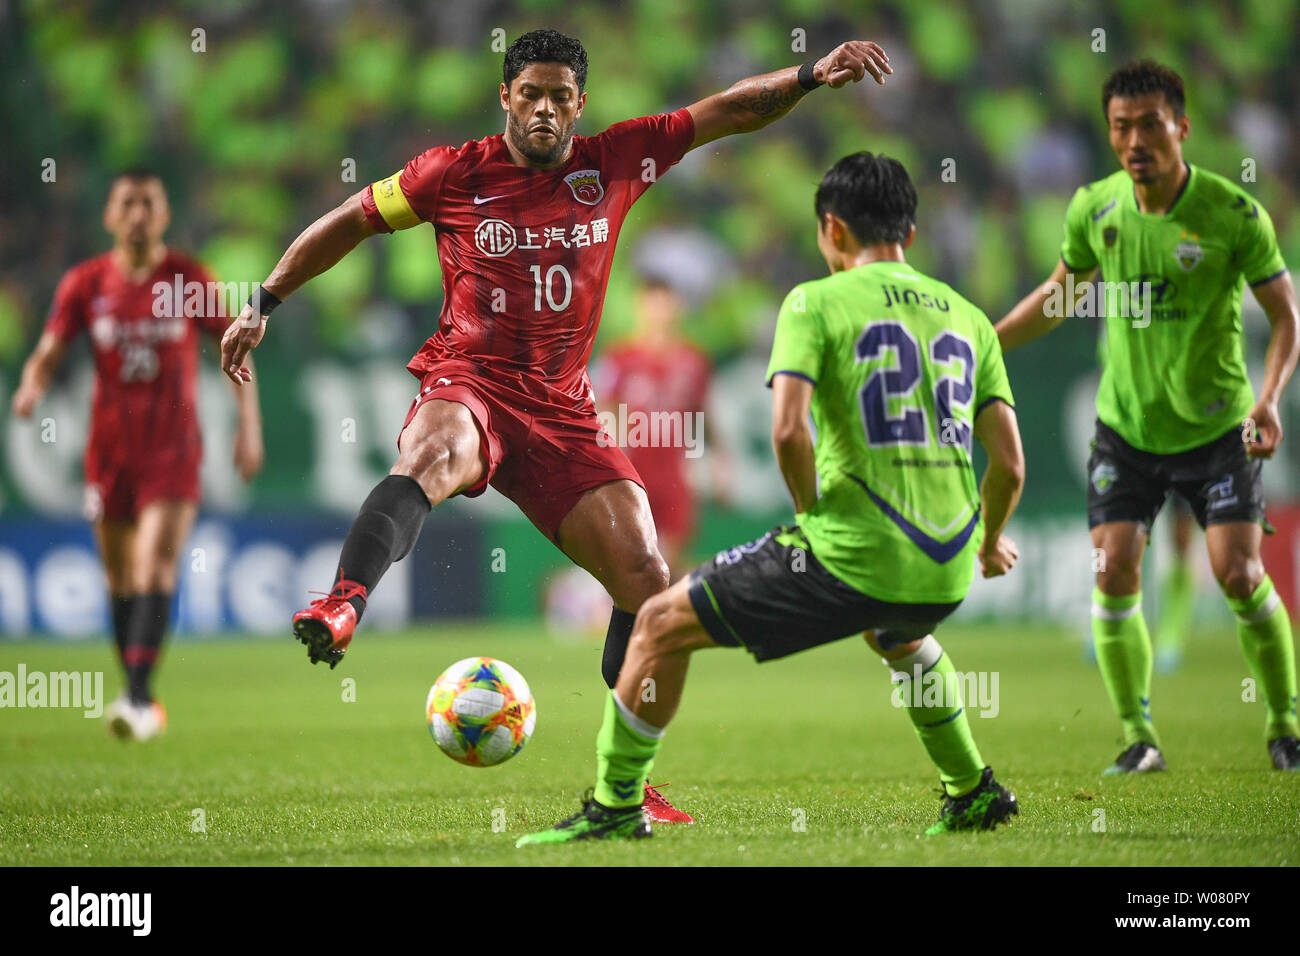 Brazilian football player Givanildo Vieira de Sousa, known as Hulk, left, of China's Shanghai SIPG F.C. passes the ball against Kim Jin-su of South Korea's Jeonbuk Hyundai Motors F.C. in the quarter-final match during the 2019 AFC Champions League in Jeonju, South Korea, 26 June 2019. Shanghai SIPG needed penalties to secure their place in the quarter-finals of the AFC Champions League on Wednesday, with Oscar scoring the final spot-kick to take the Chinese Super League champions past two-time winners Jeonbuk Hyundai Motors with a 5-3 penalty shootout win. Stock Photo